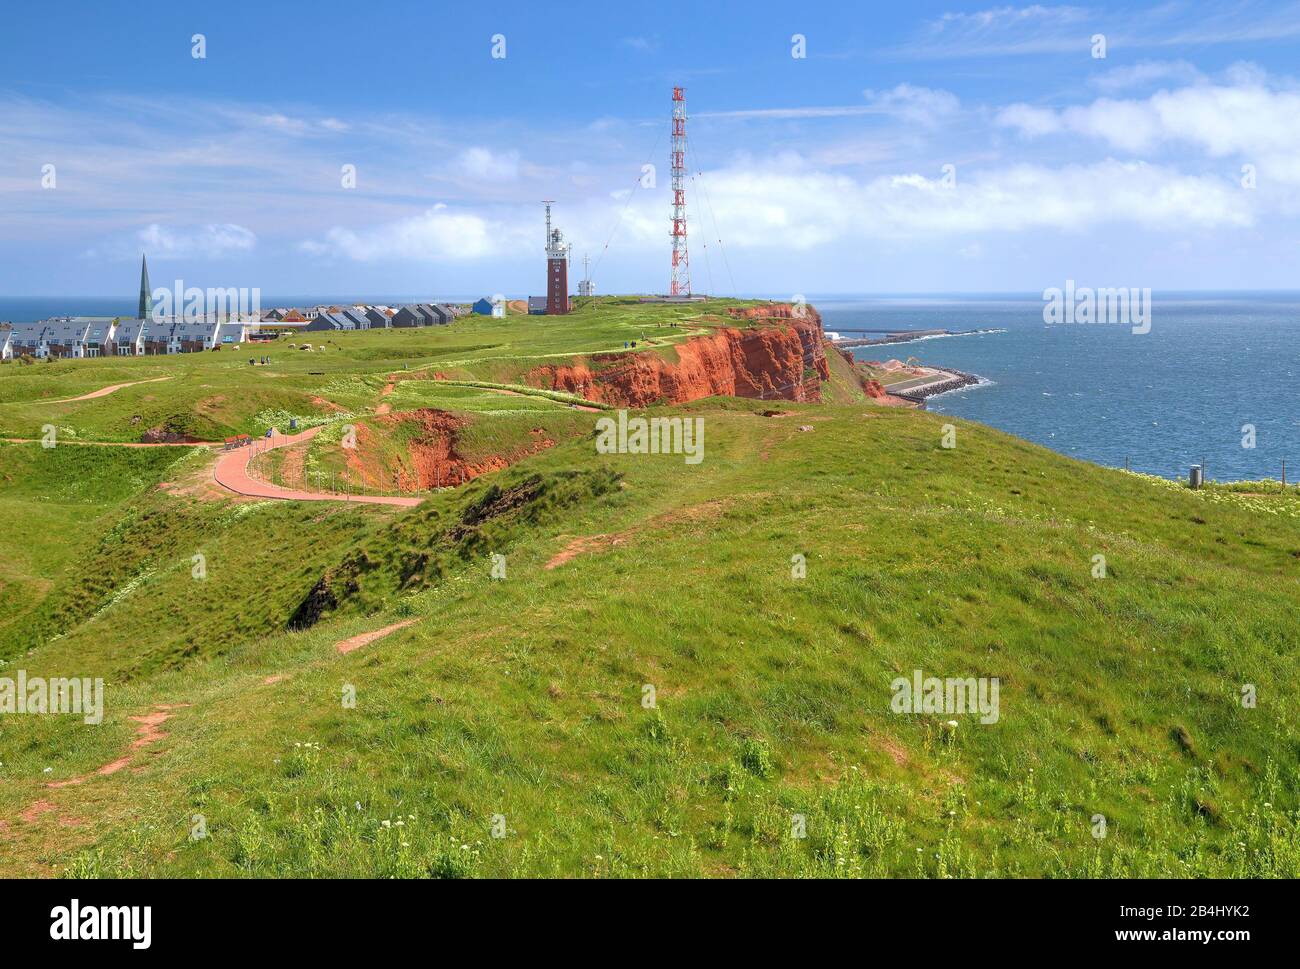 View from Pinneberg 61, 3m over the Oberland with location lighthouse and transmission tower, Heligoland, Helgoland Bay, German Bay, North Sea island, North Sea, Schleswig-Holstein, Germany Stock Photo